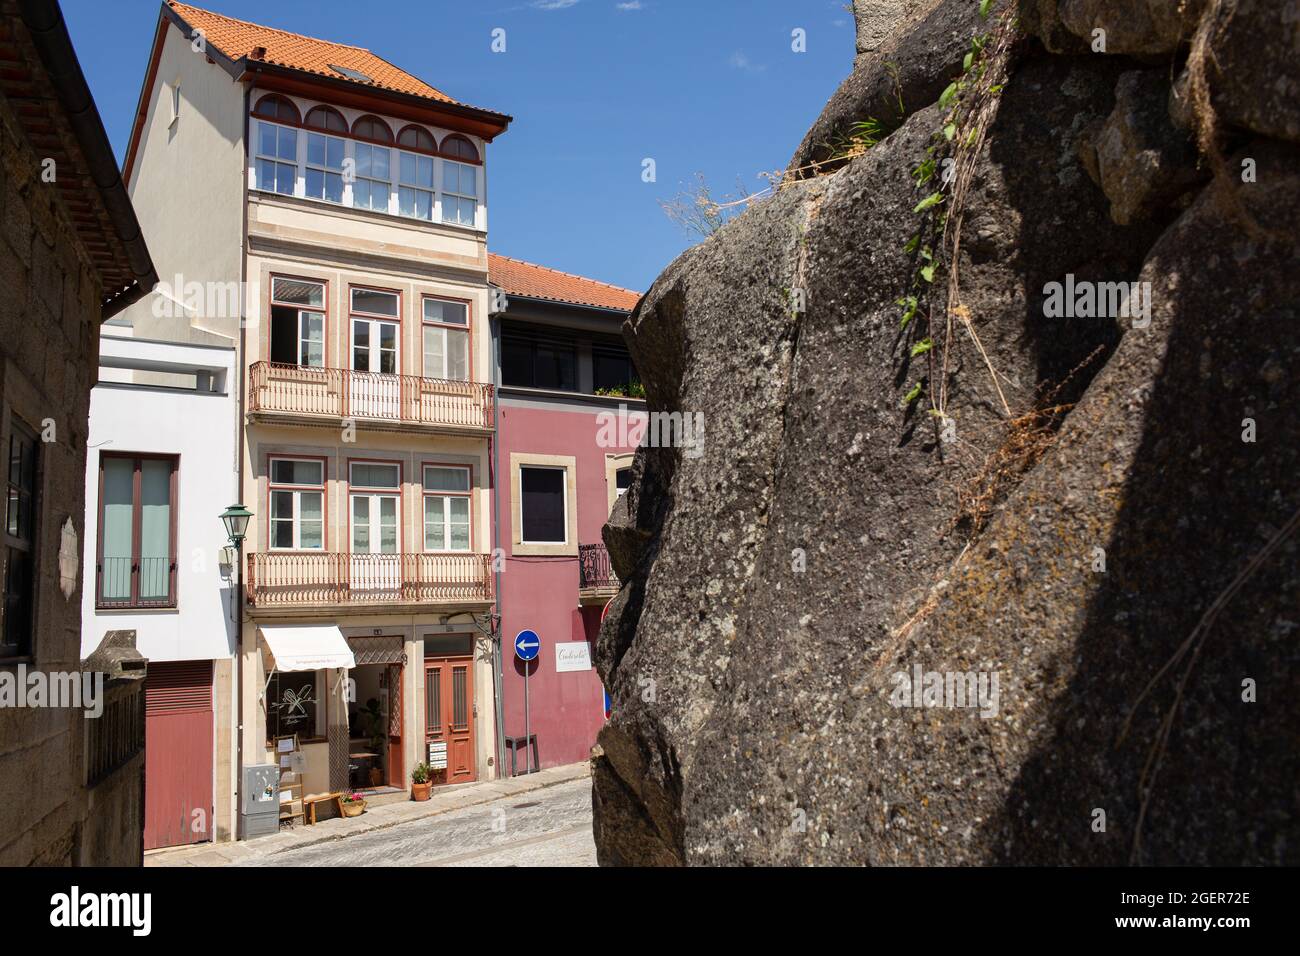 Viseu, Portugal - July 31, 2021: one of the streets in the old town Stock Photo